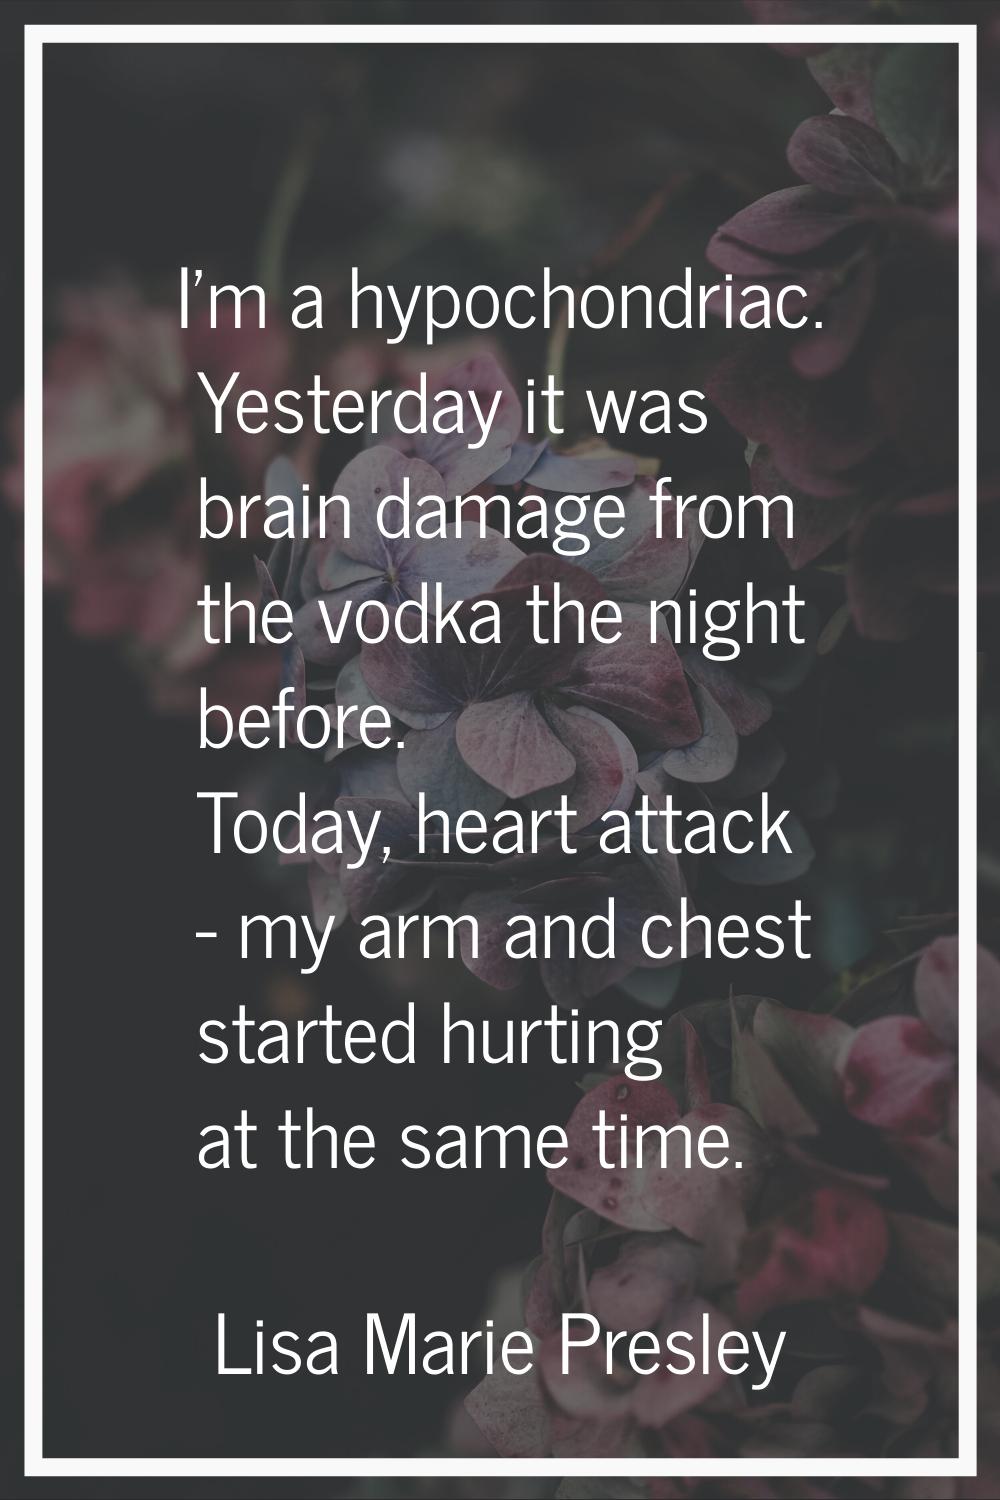 I'm a hypochondriac. Yesterday it was brain damage from the vodka the night before. Today, heart at